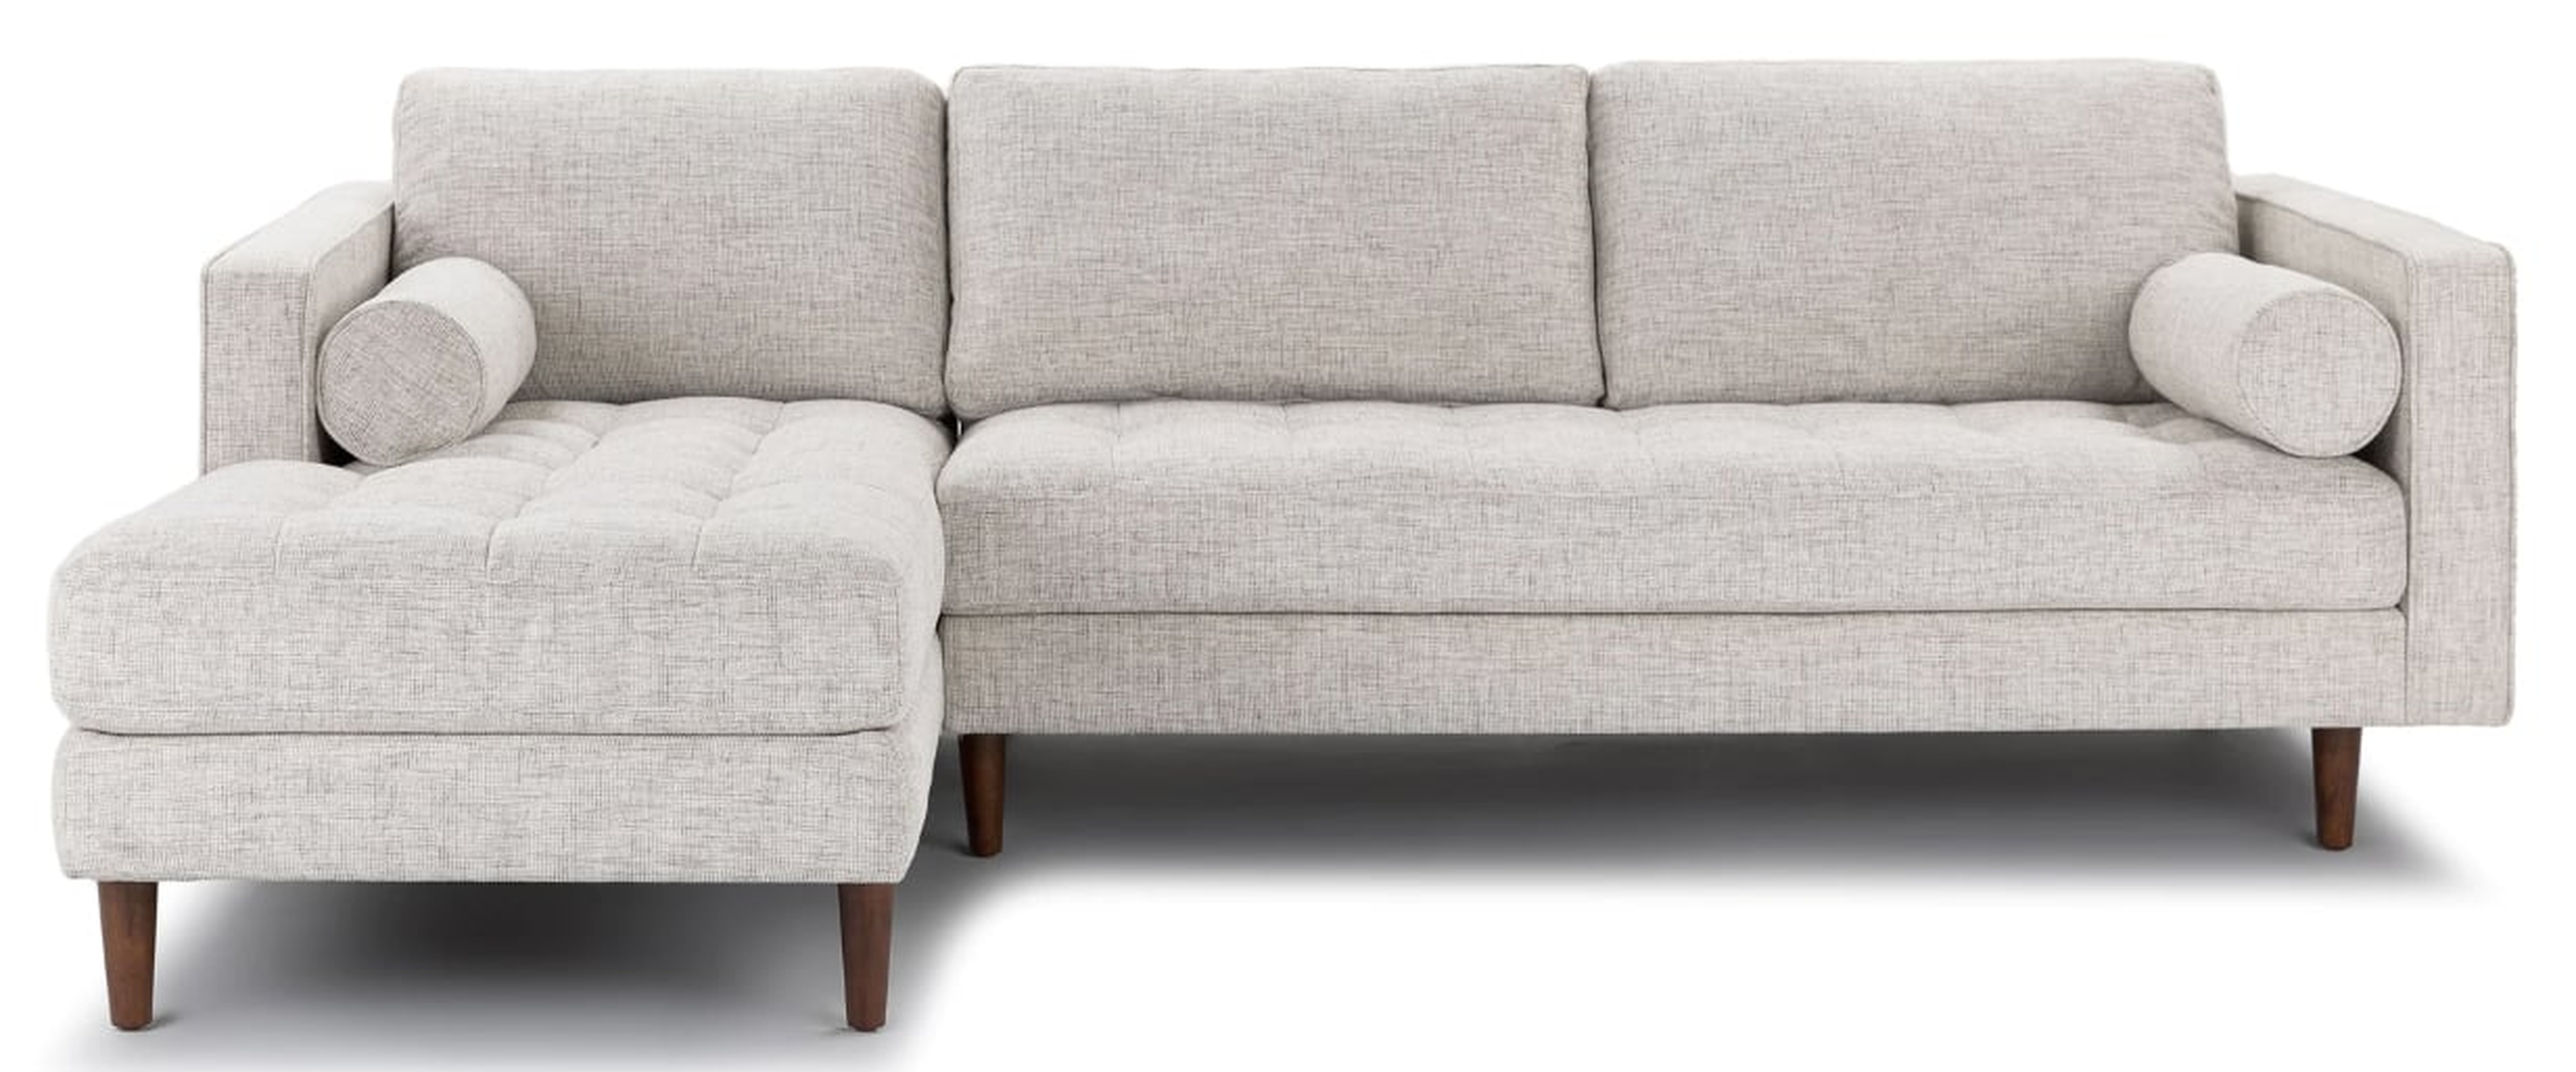 Sven Birch Ivory Left Sectional Sofa - Article